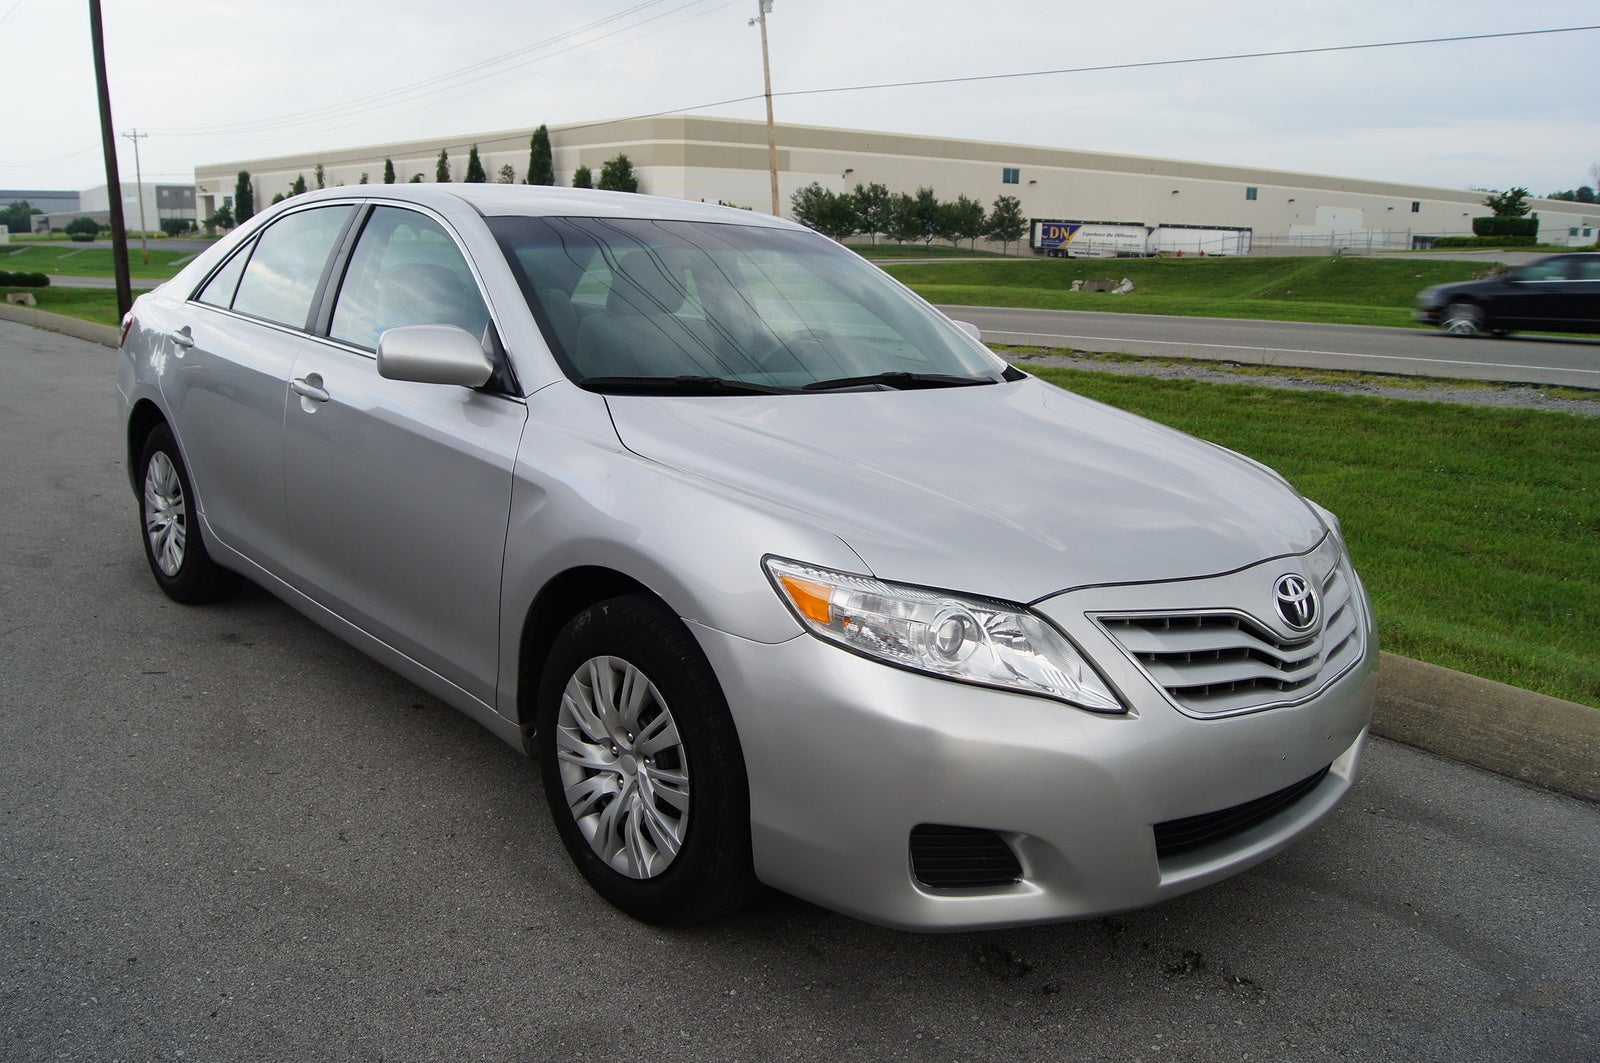 Picture of 2010 Toyota Camry SE, exterior